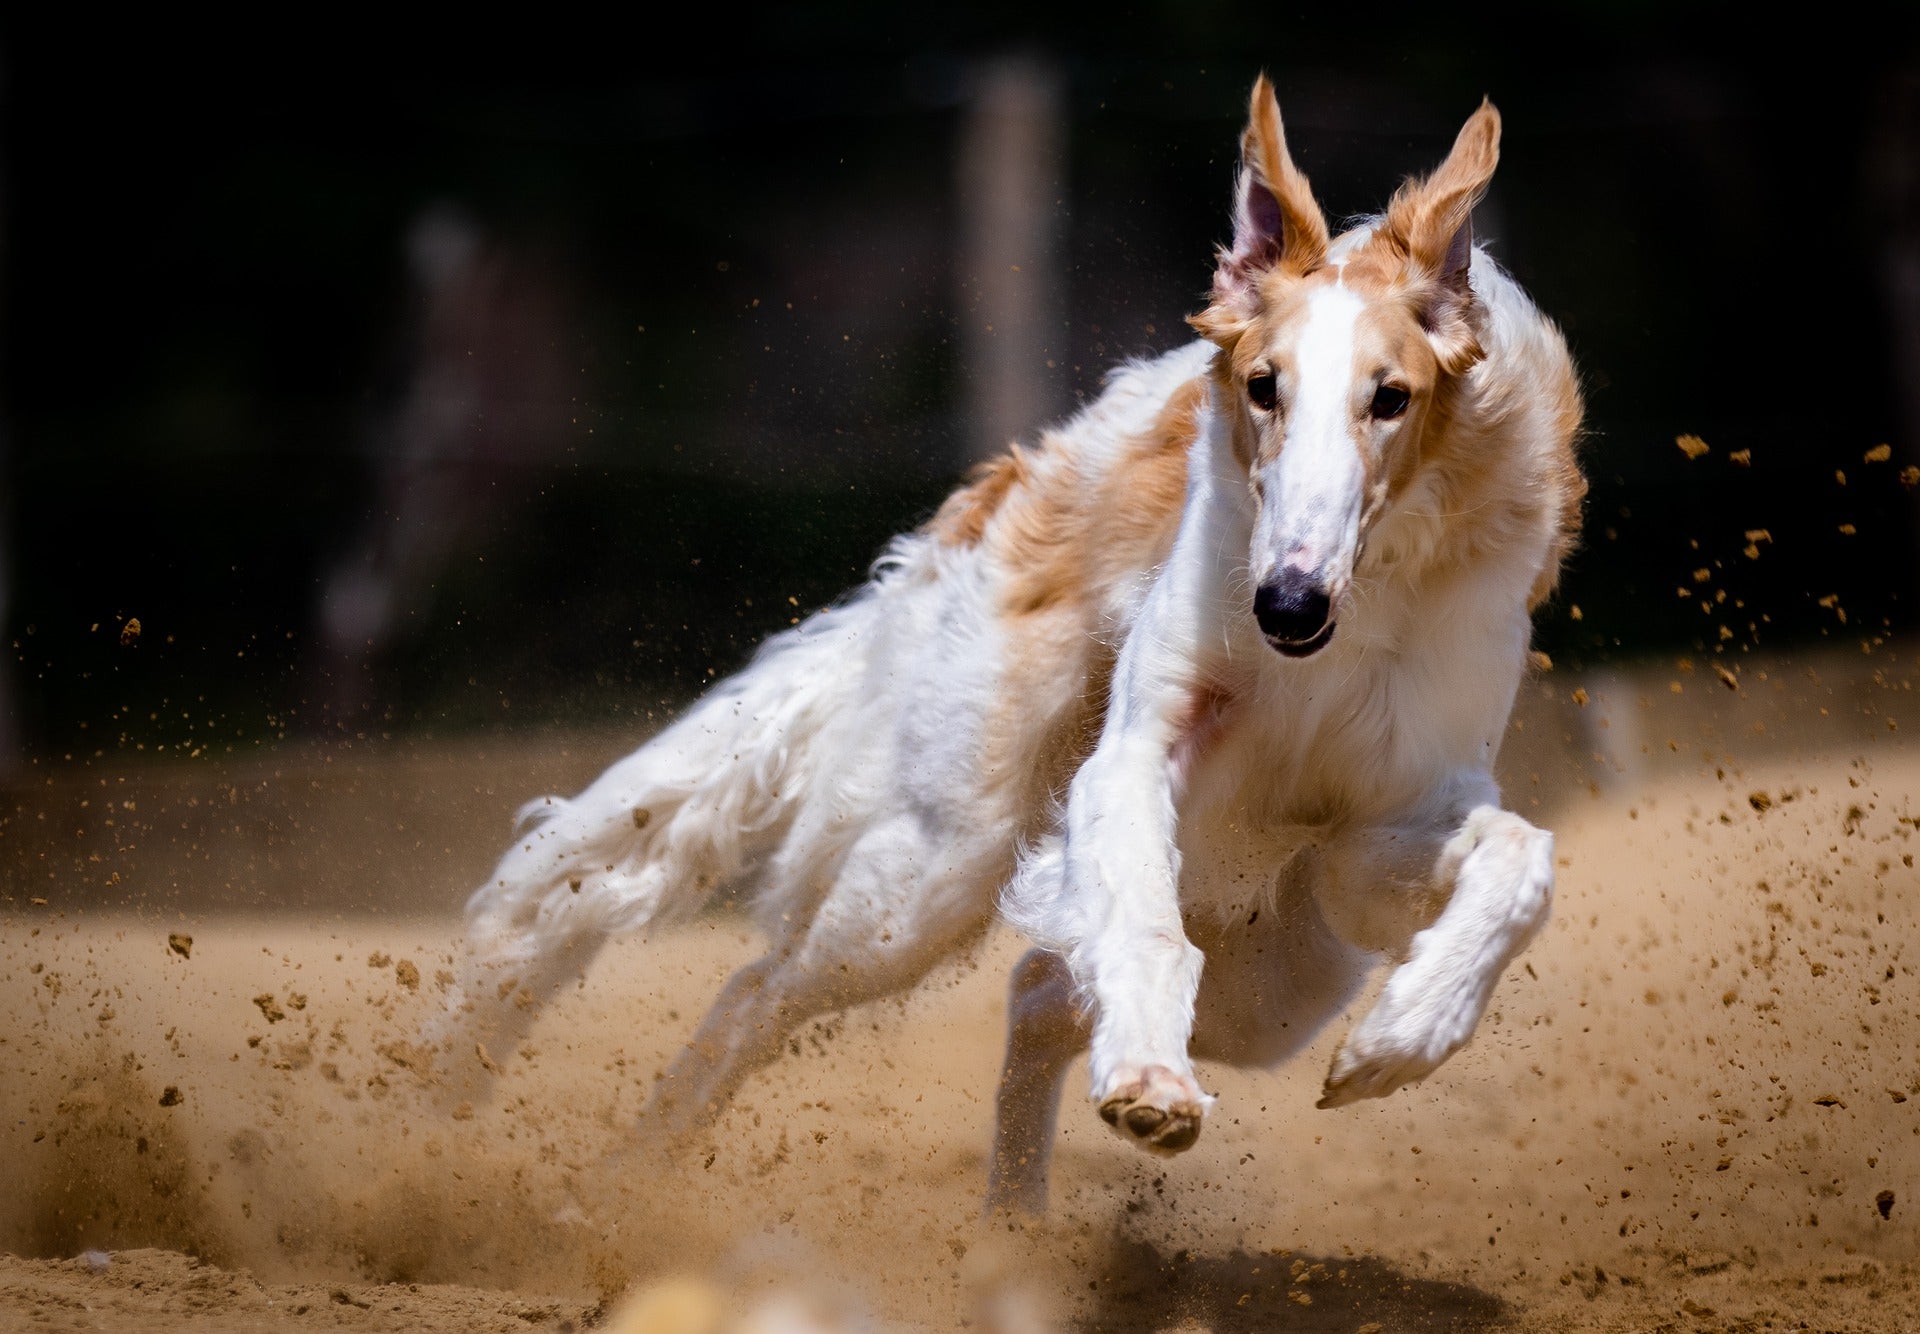 Competition dog running fast throwing dirt